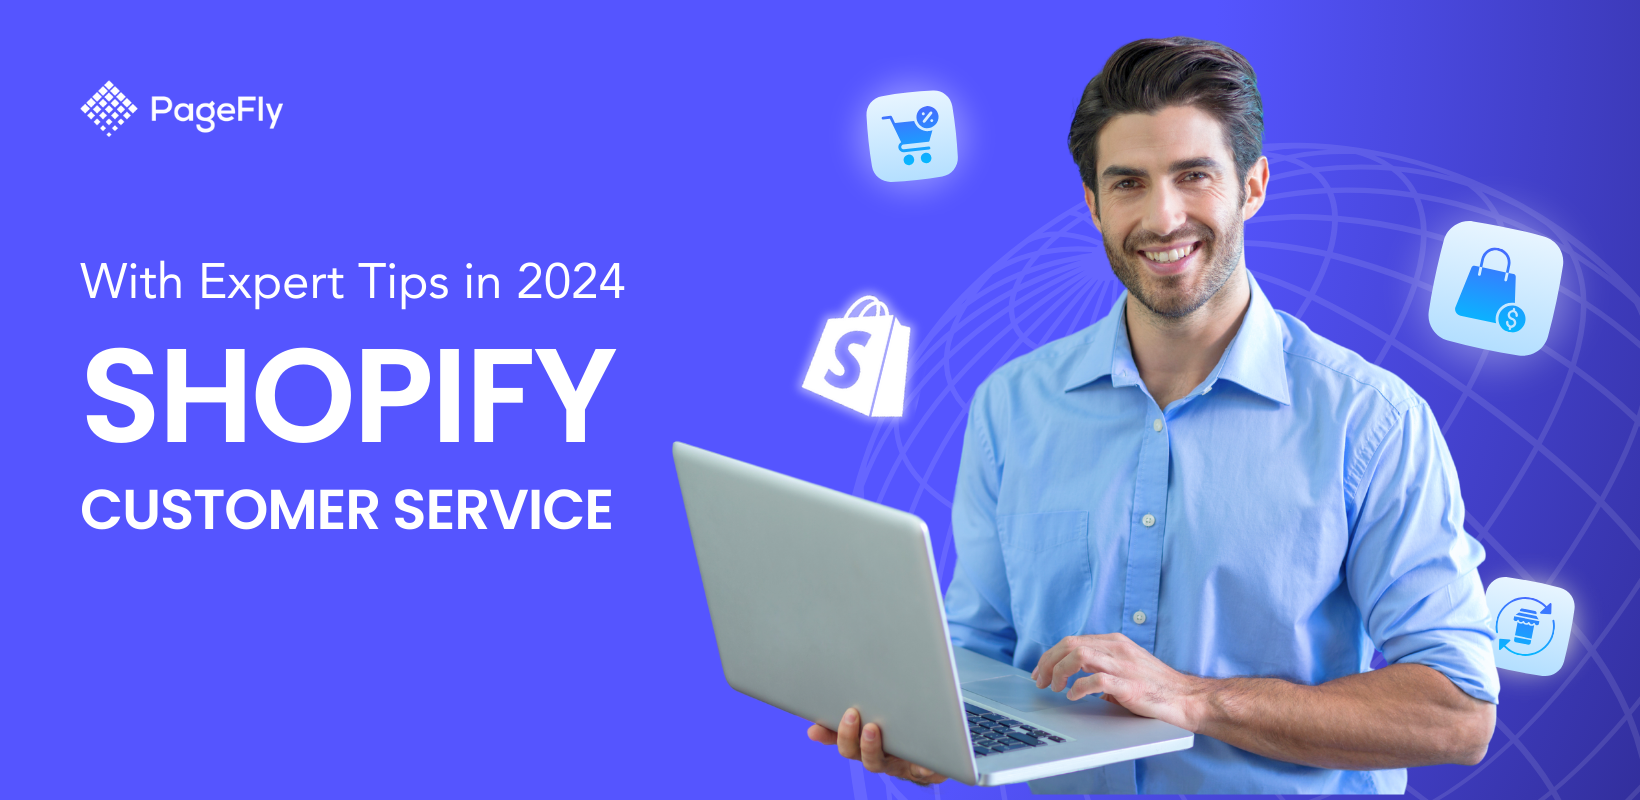 Reach The Best Shopify Customer Service In 2024 With Expert Tips